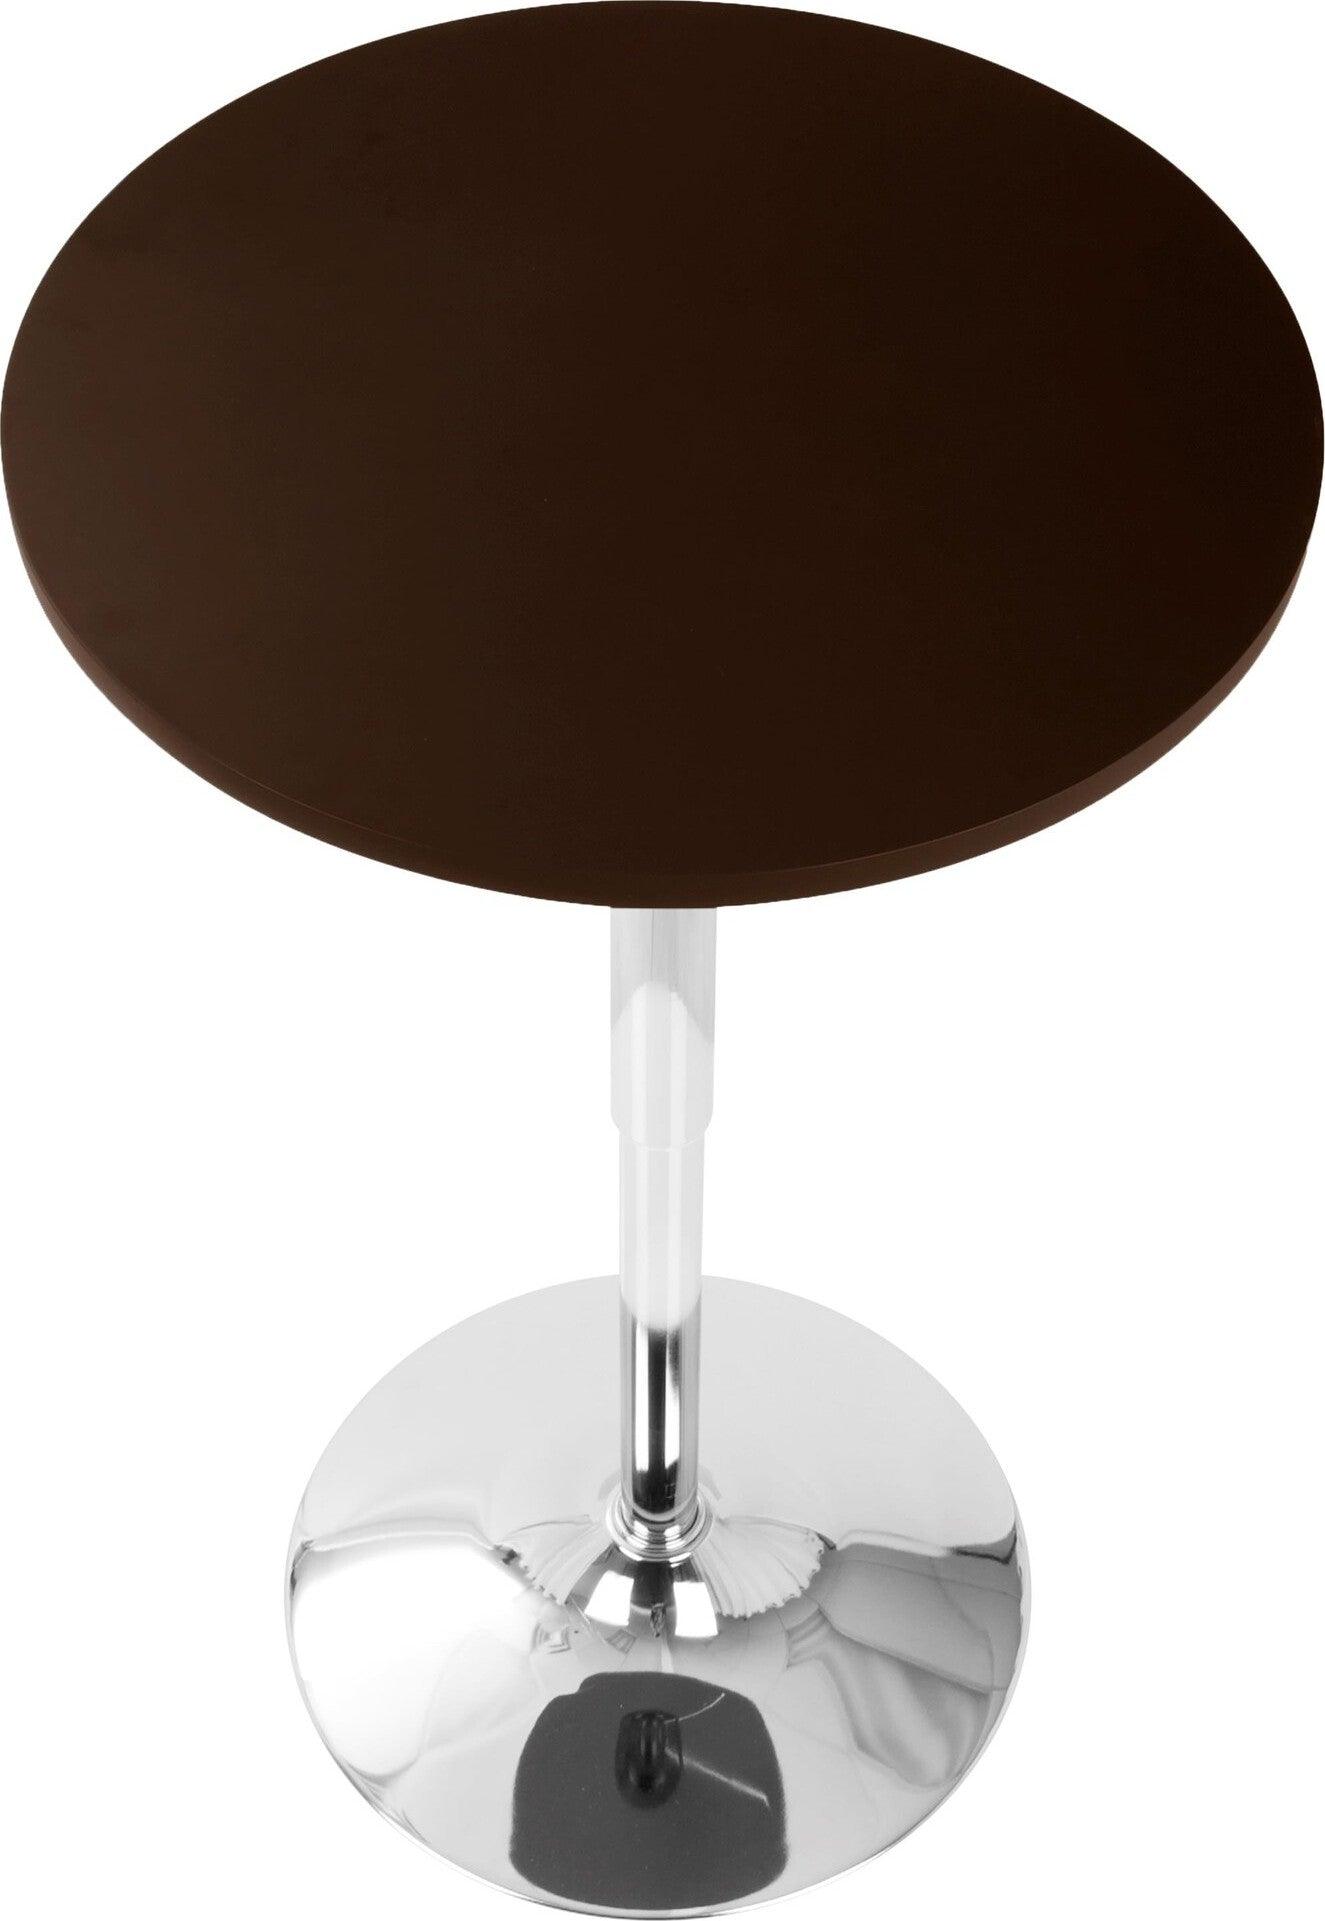 Lumisource Bar Tables - Adjustable Contemporary Bar Table in Brown